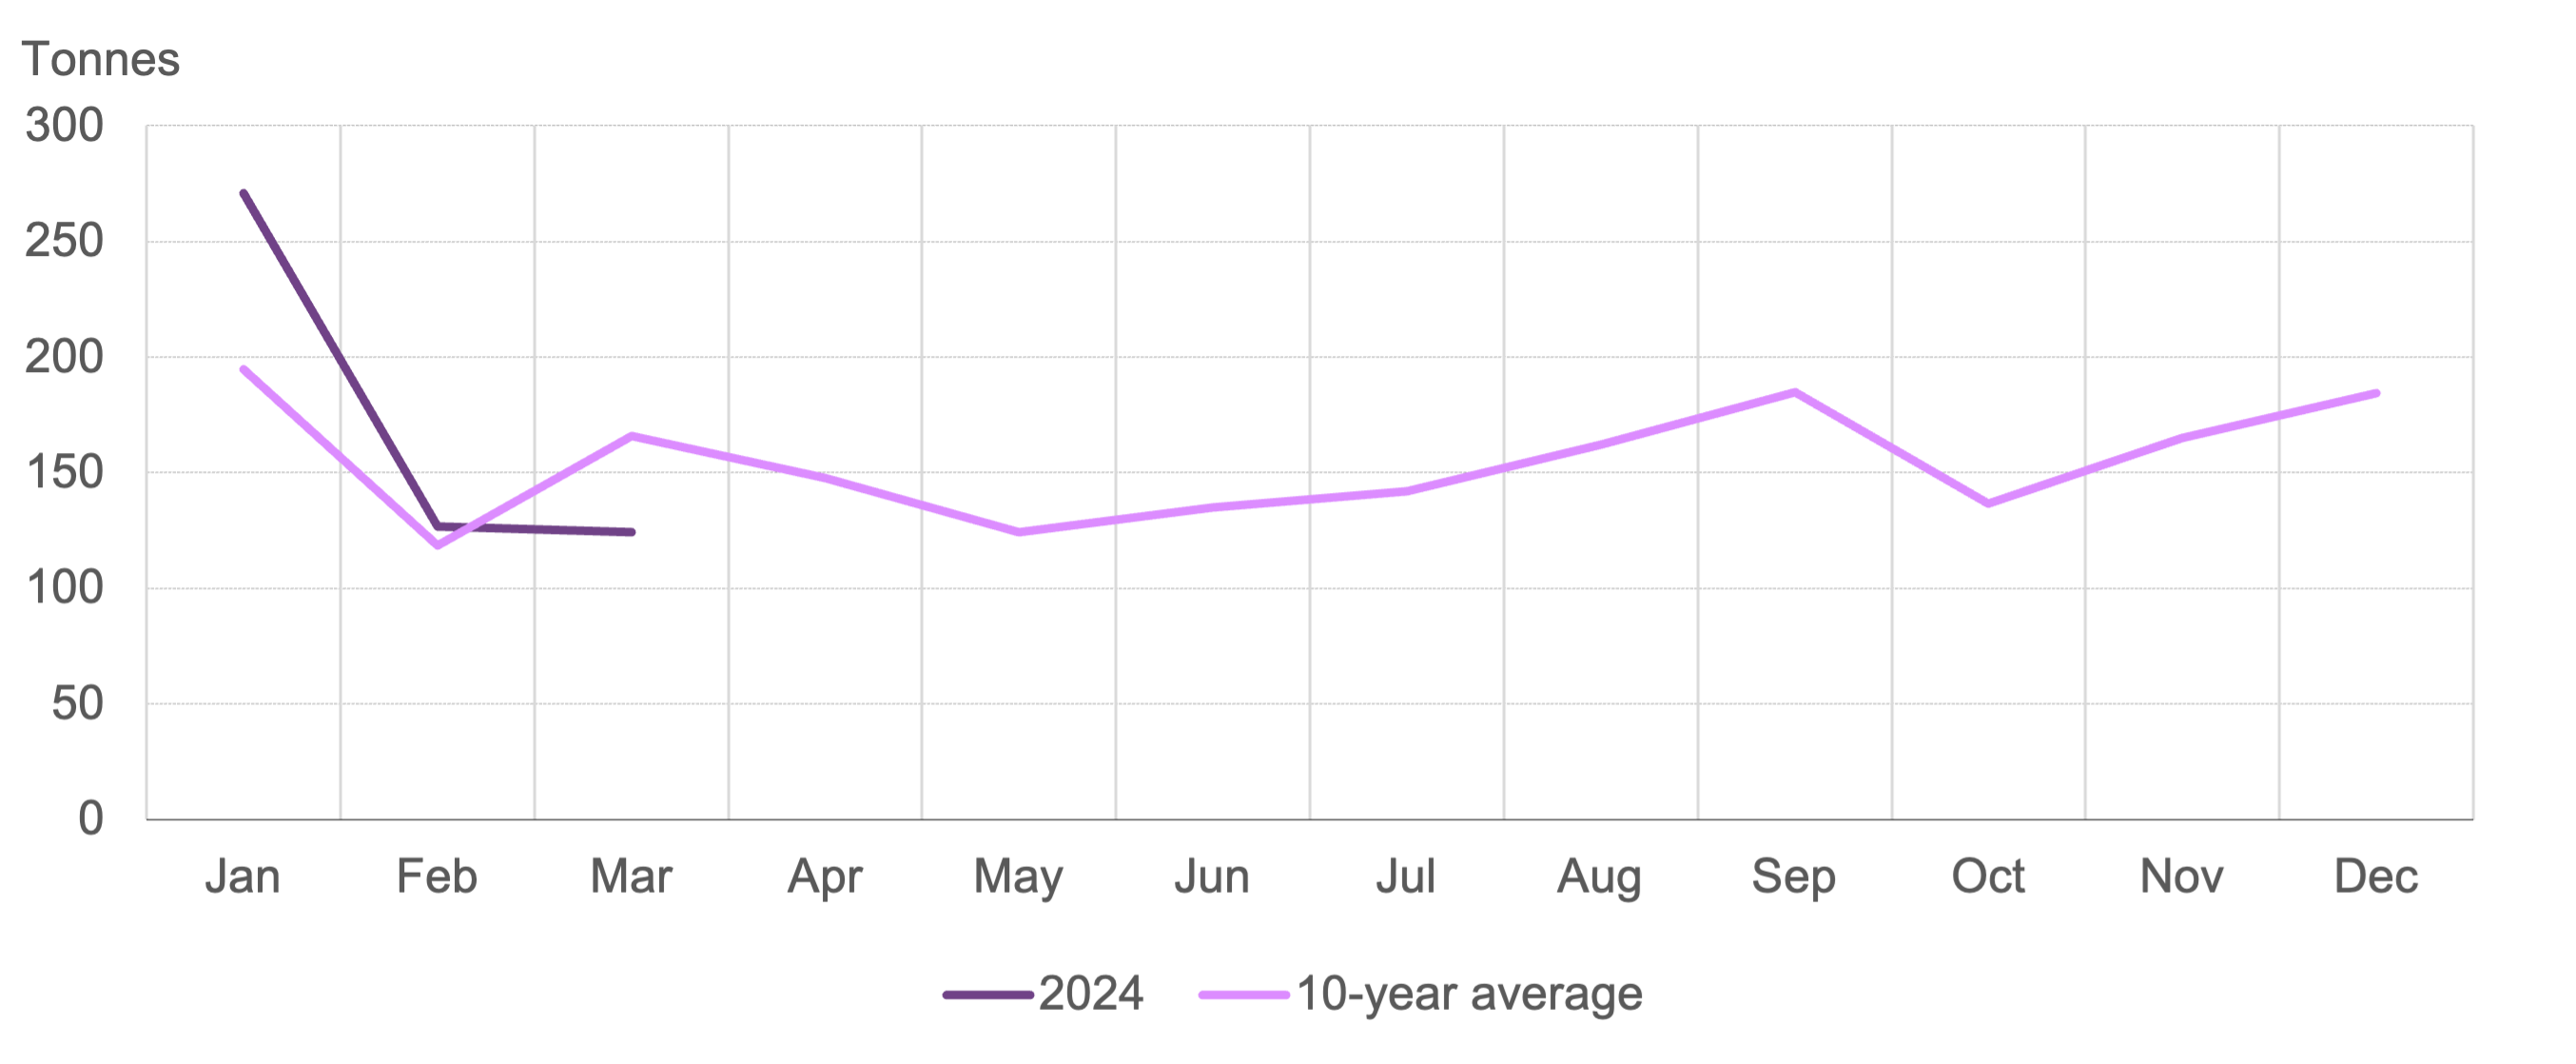 <p class=small-text>*10-year average is based on data between 2014 and 2023.</p>